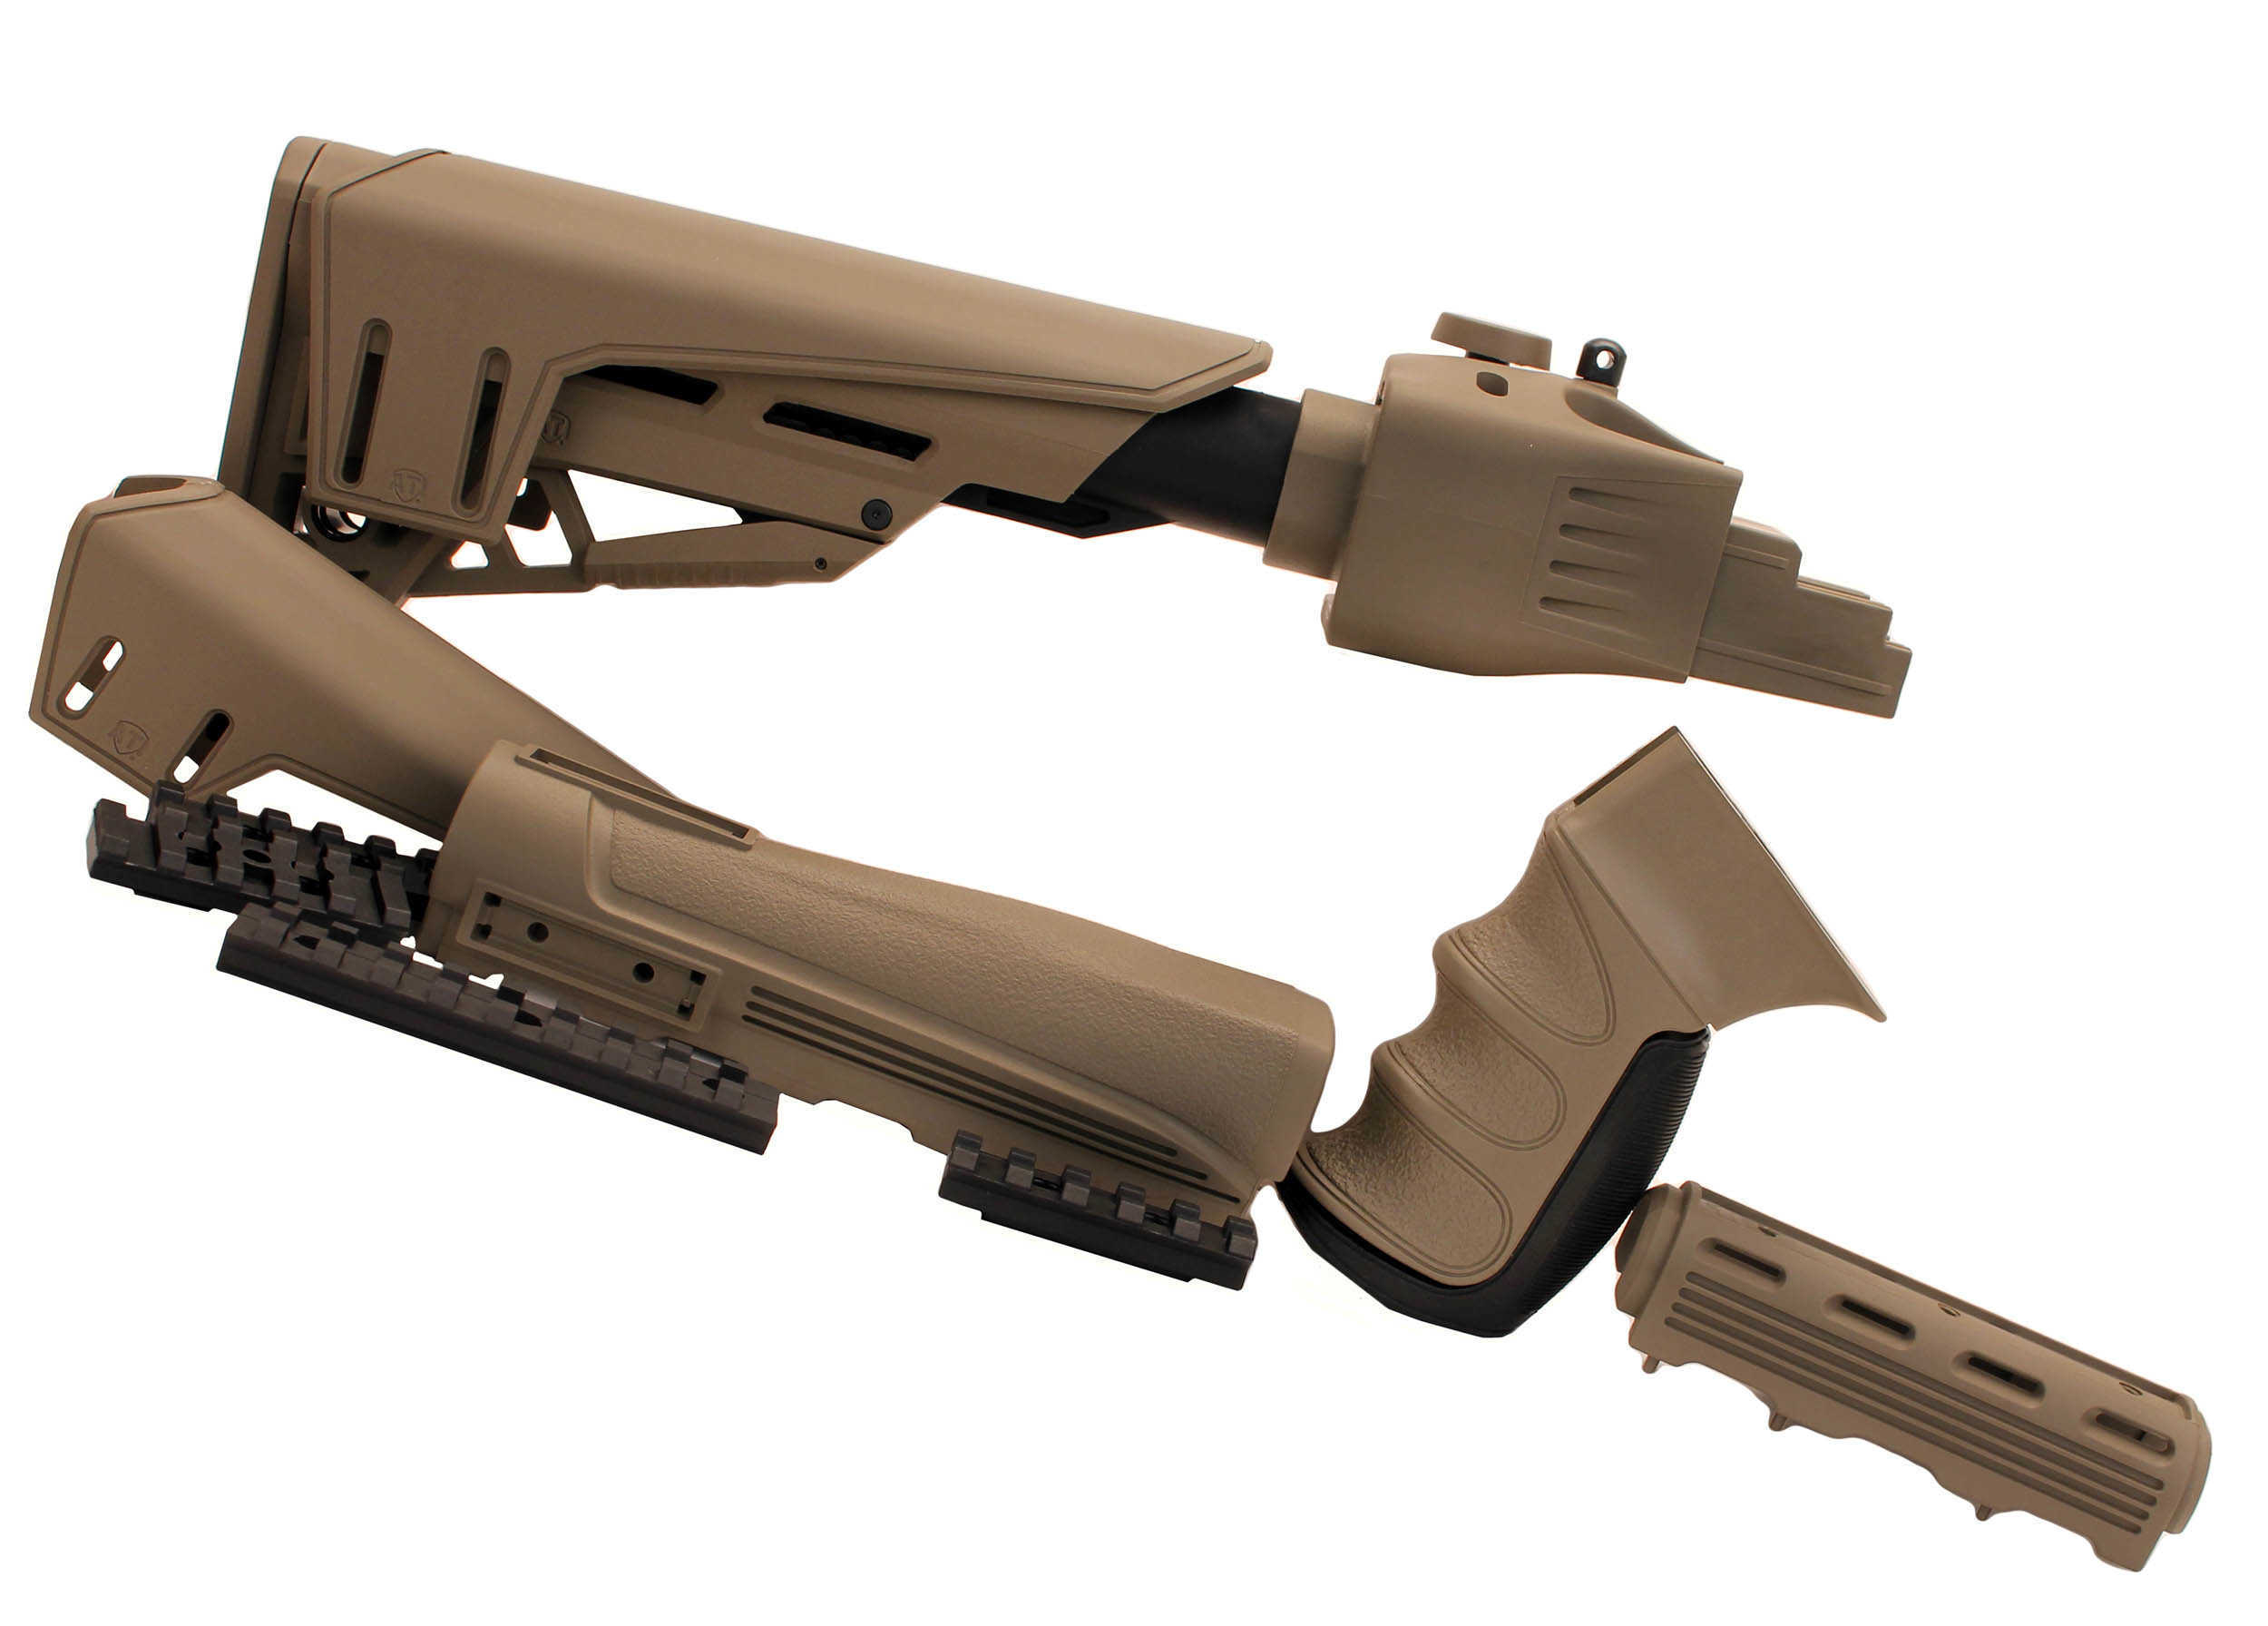 Advanced Technology Strikeforce TactLite Stock Fits AK-47 6 Position Collapsible Scorpion Recoil System Adjustable